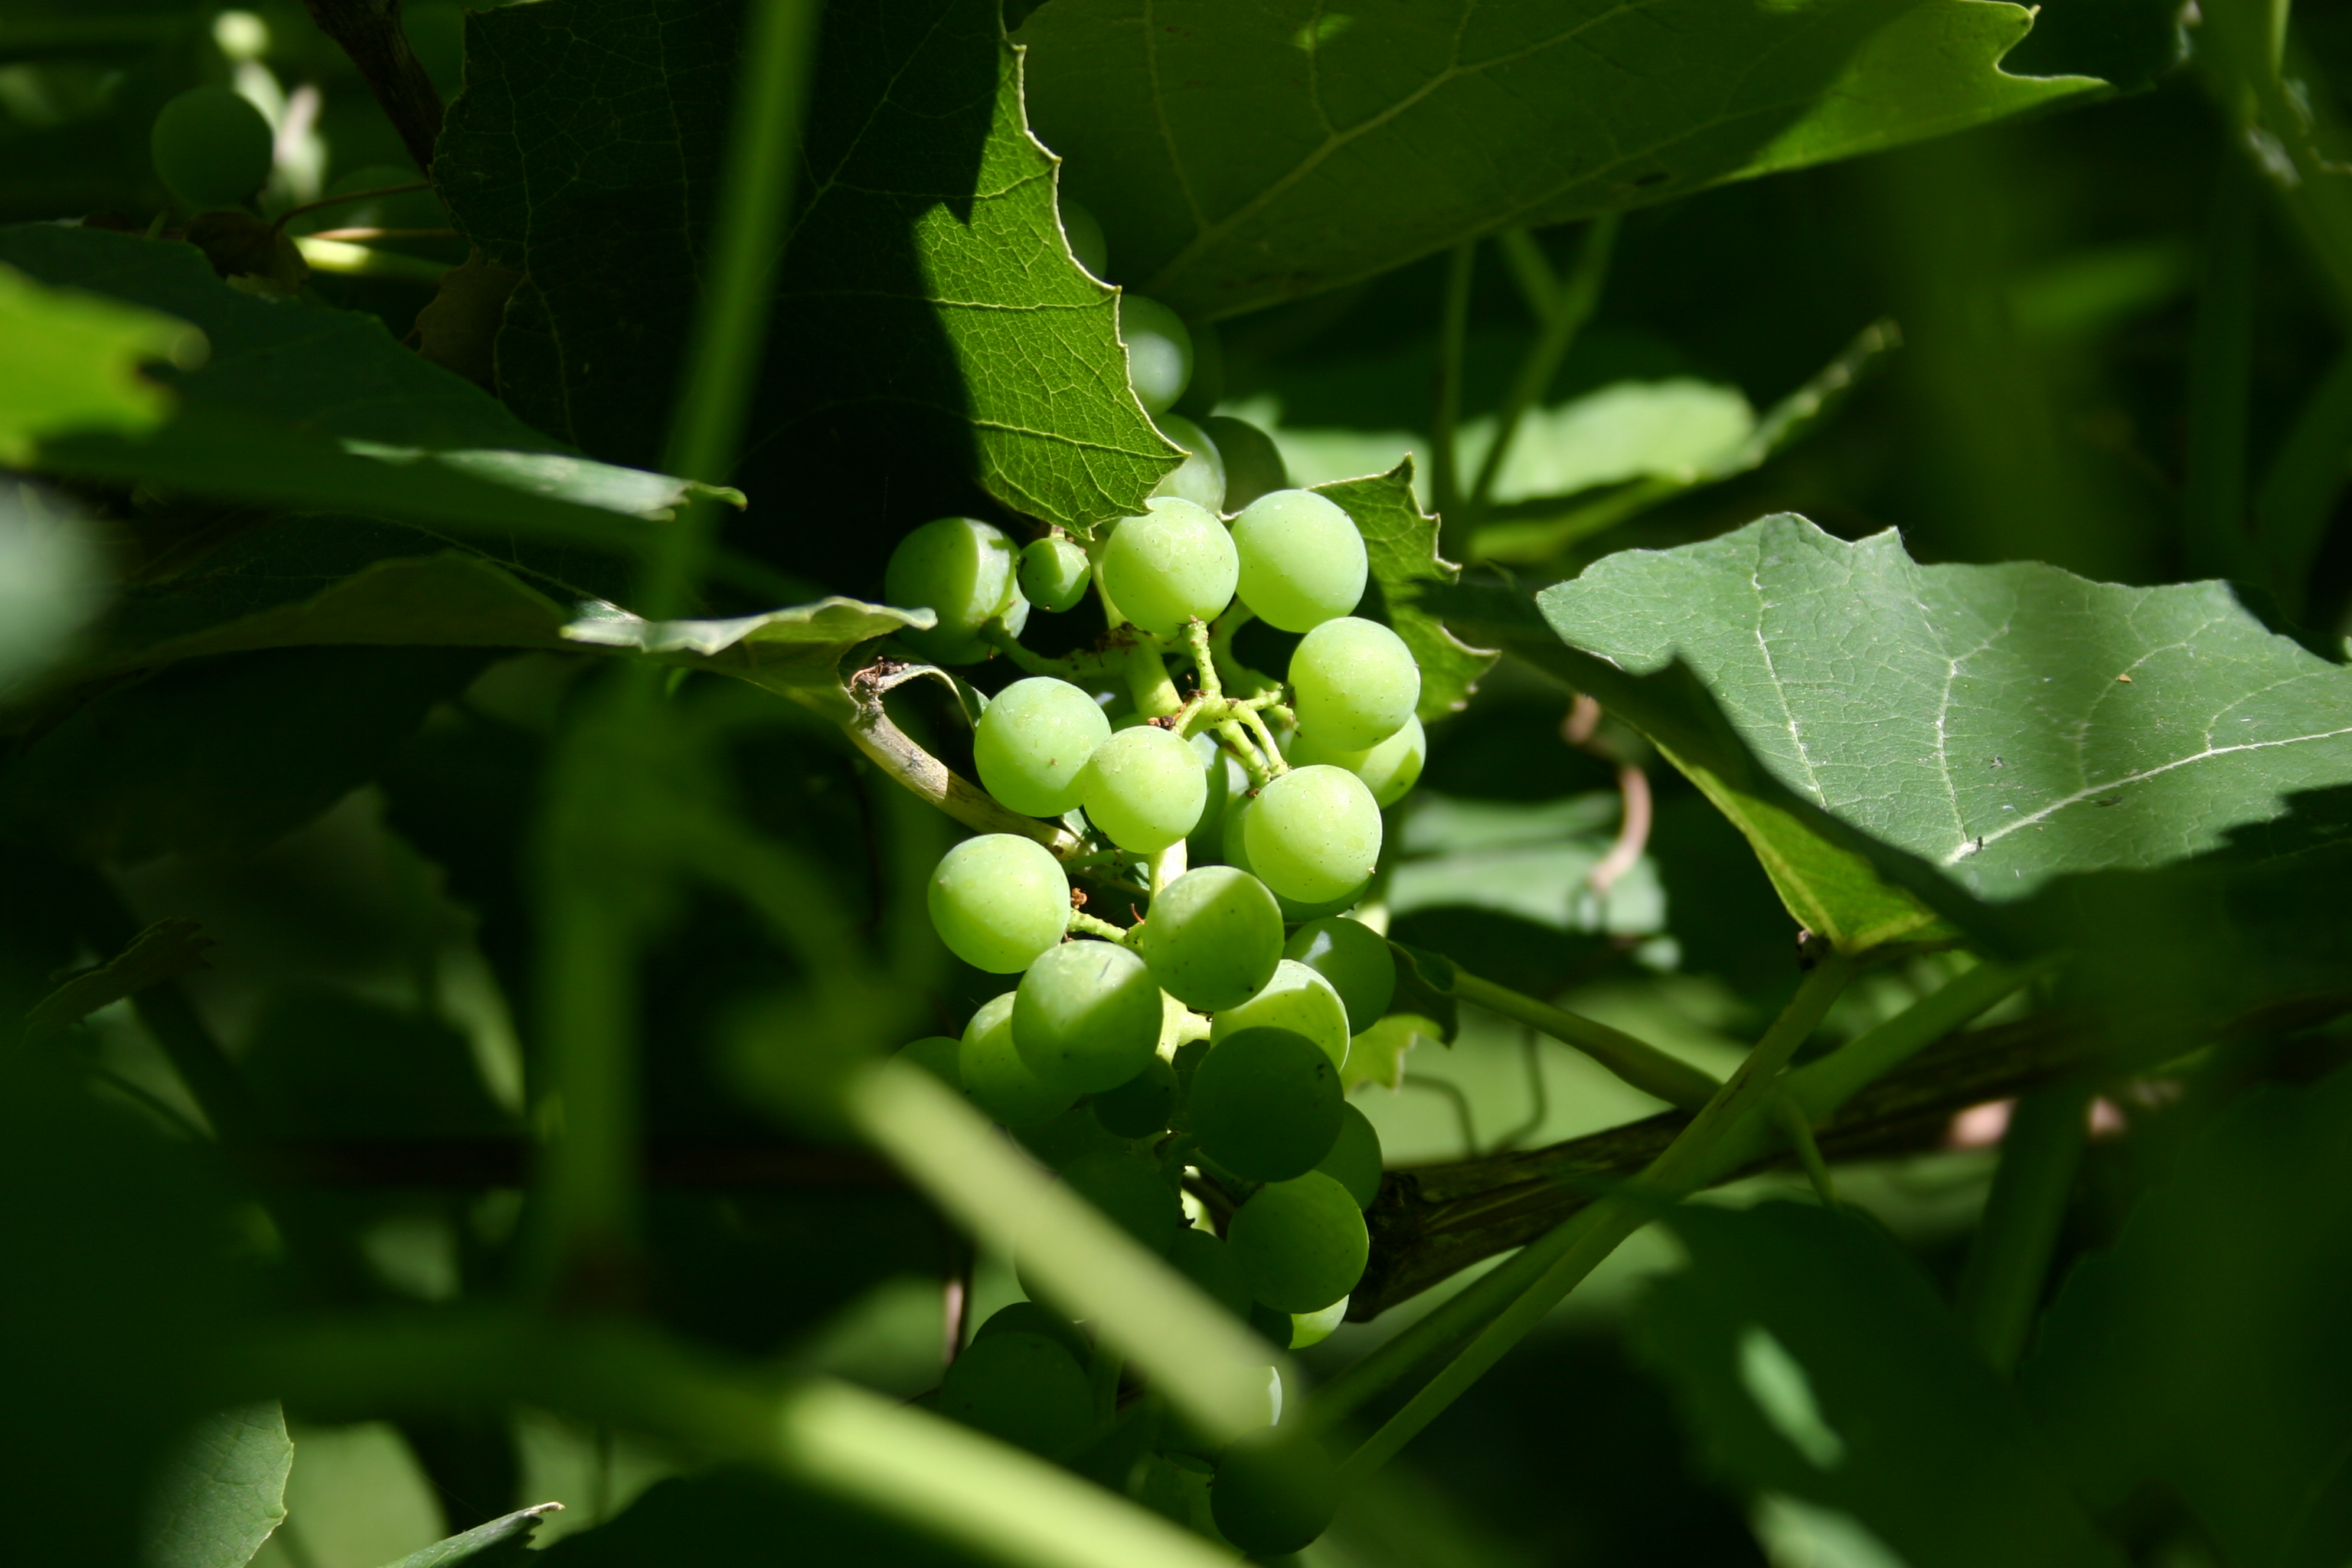 Green grapes and leaves.